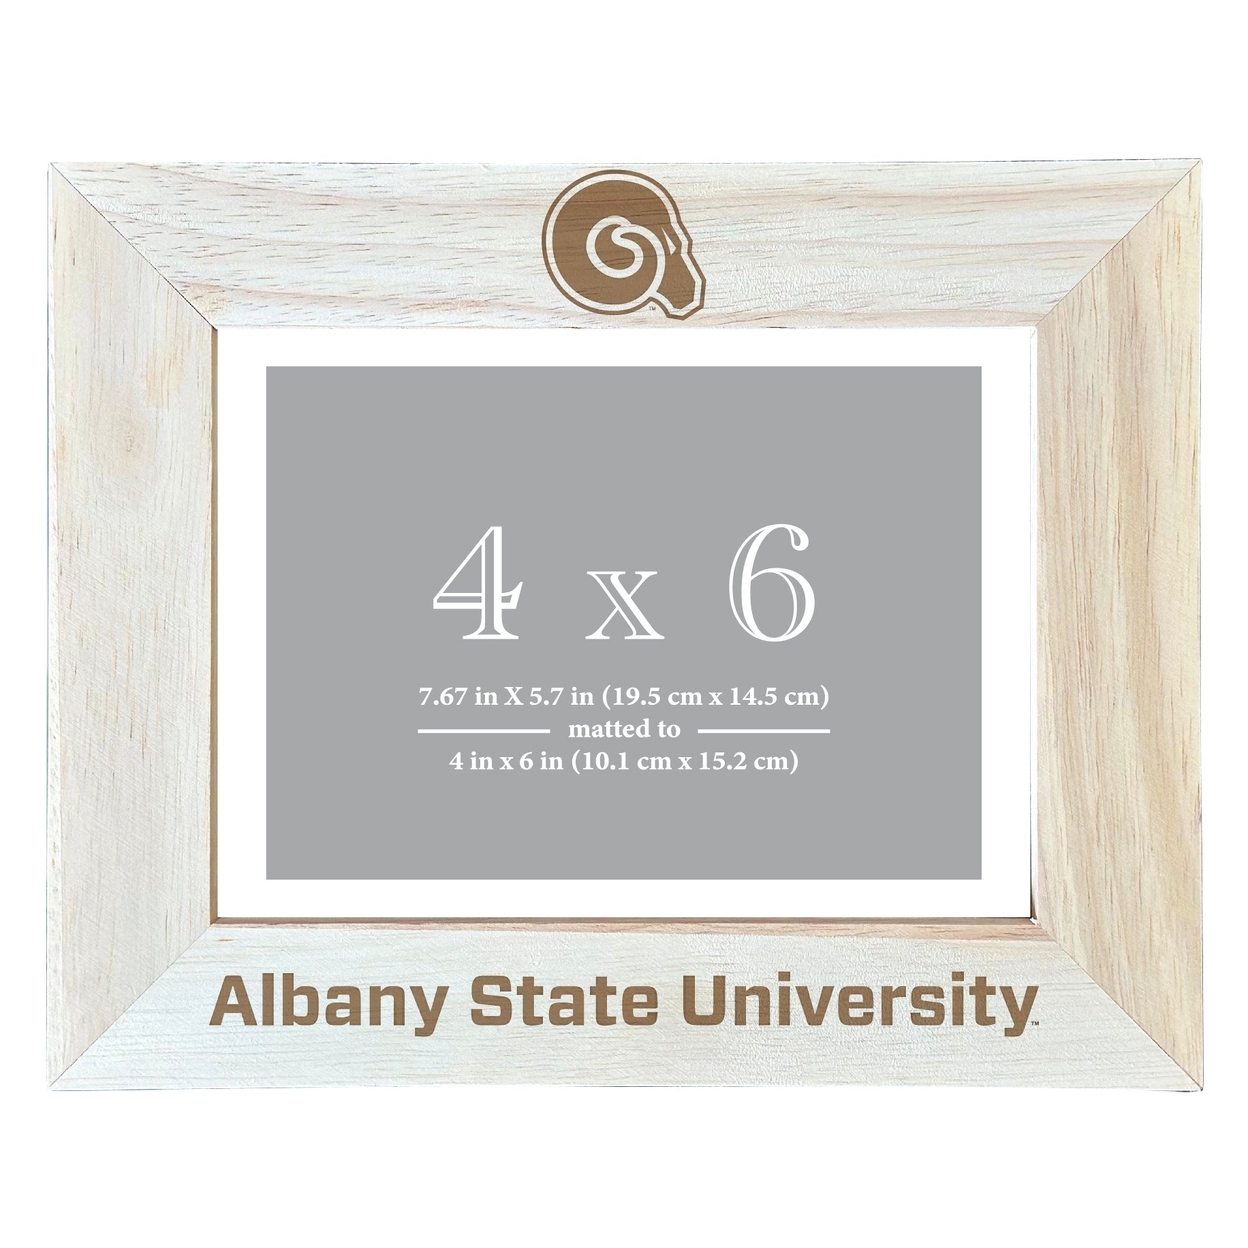 Albany State University Wooden Photo Frame Matted To 4 X 6 Inch - Etched